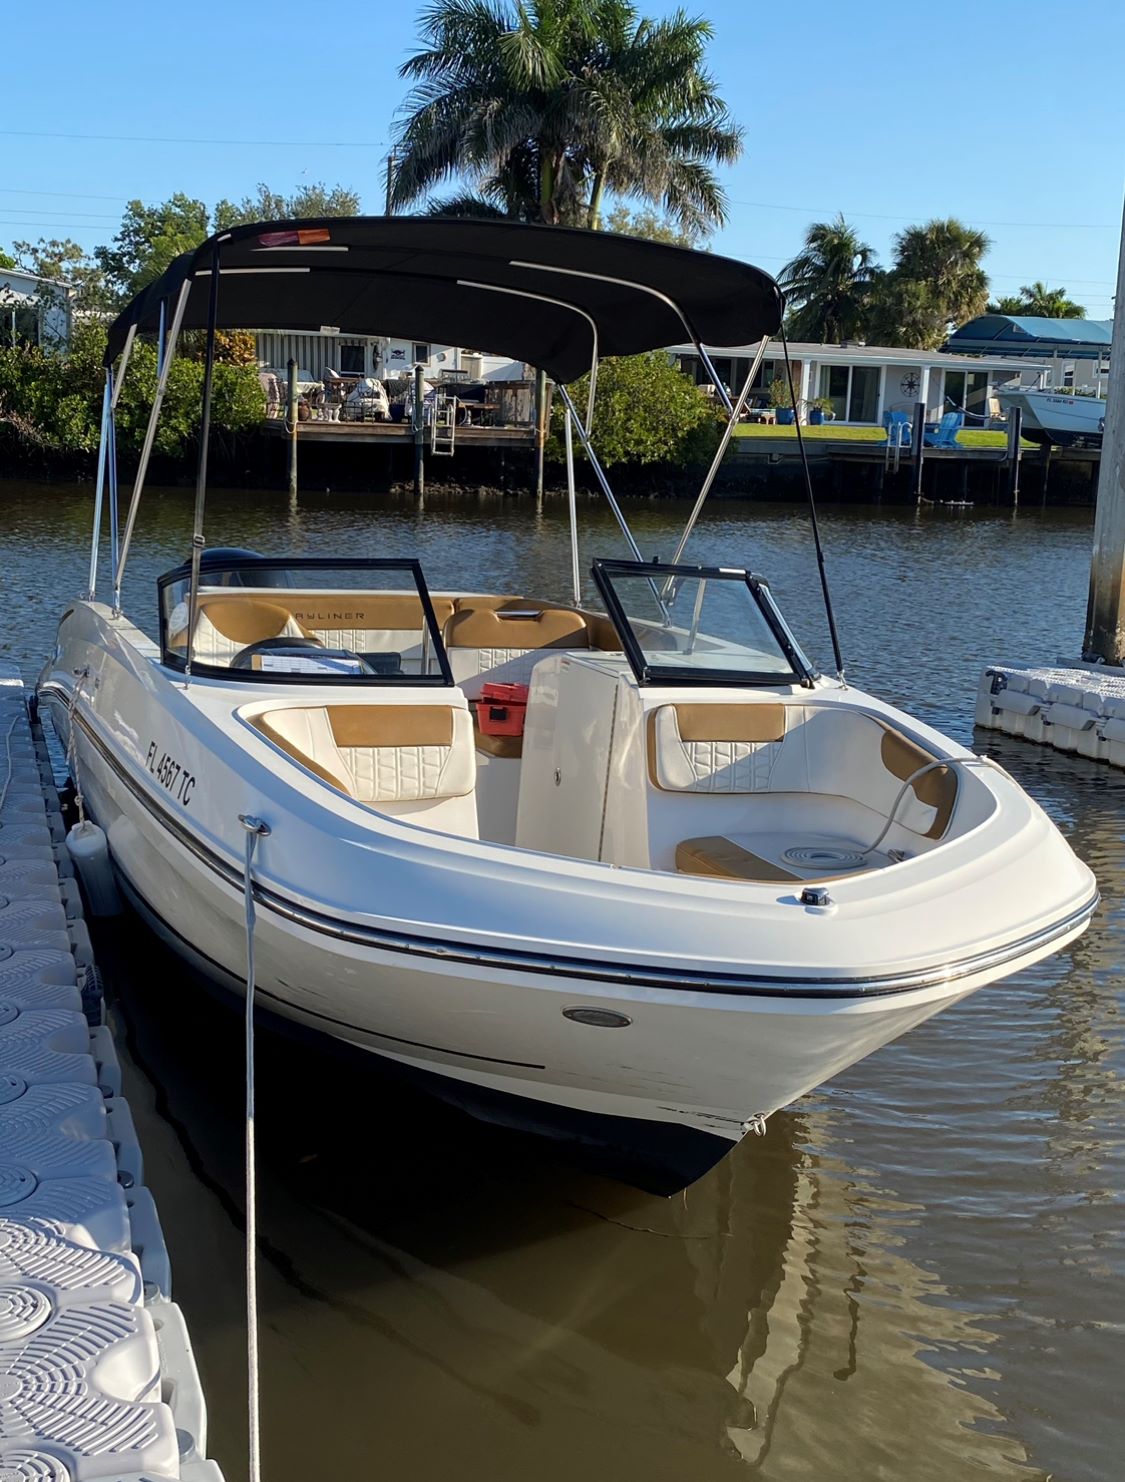 MADE TO CHILL (Bayliner 22' Deck Boat 150 HP - Cruising)